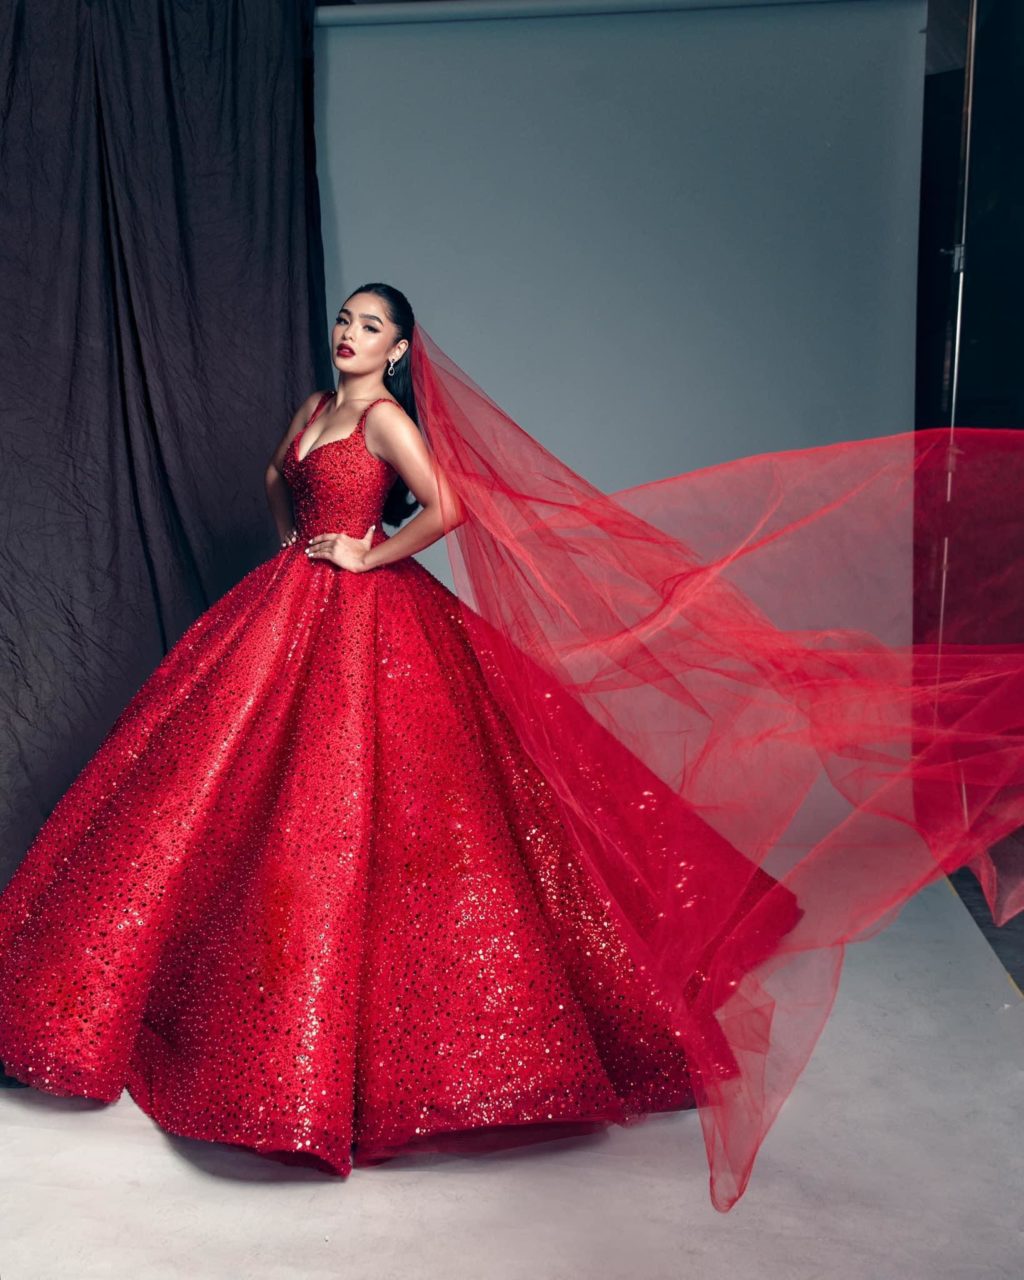 Andrea Brillantes in a red bridal gown.